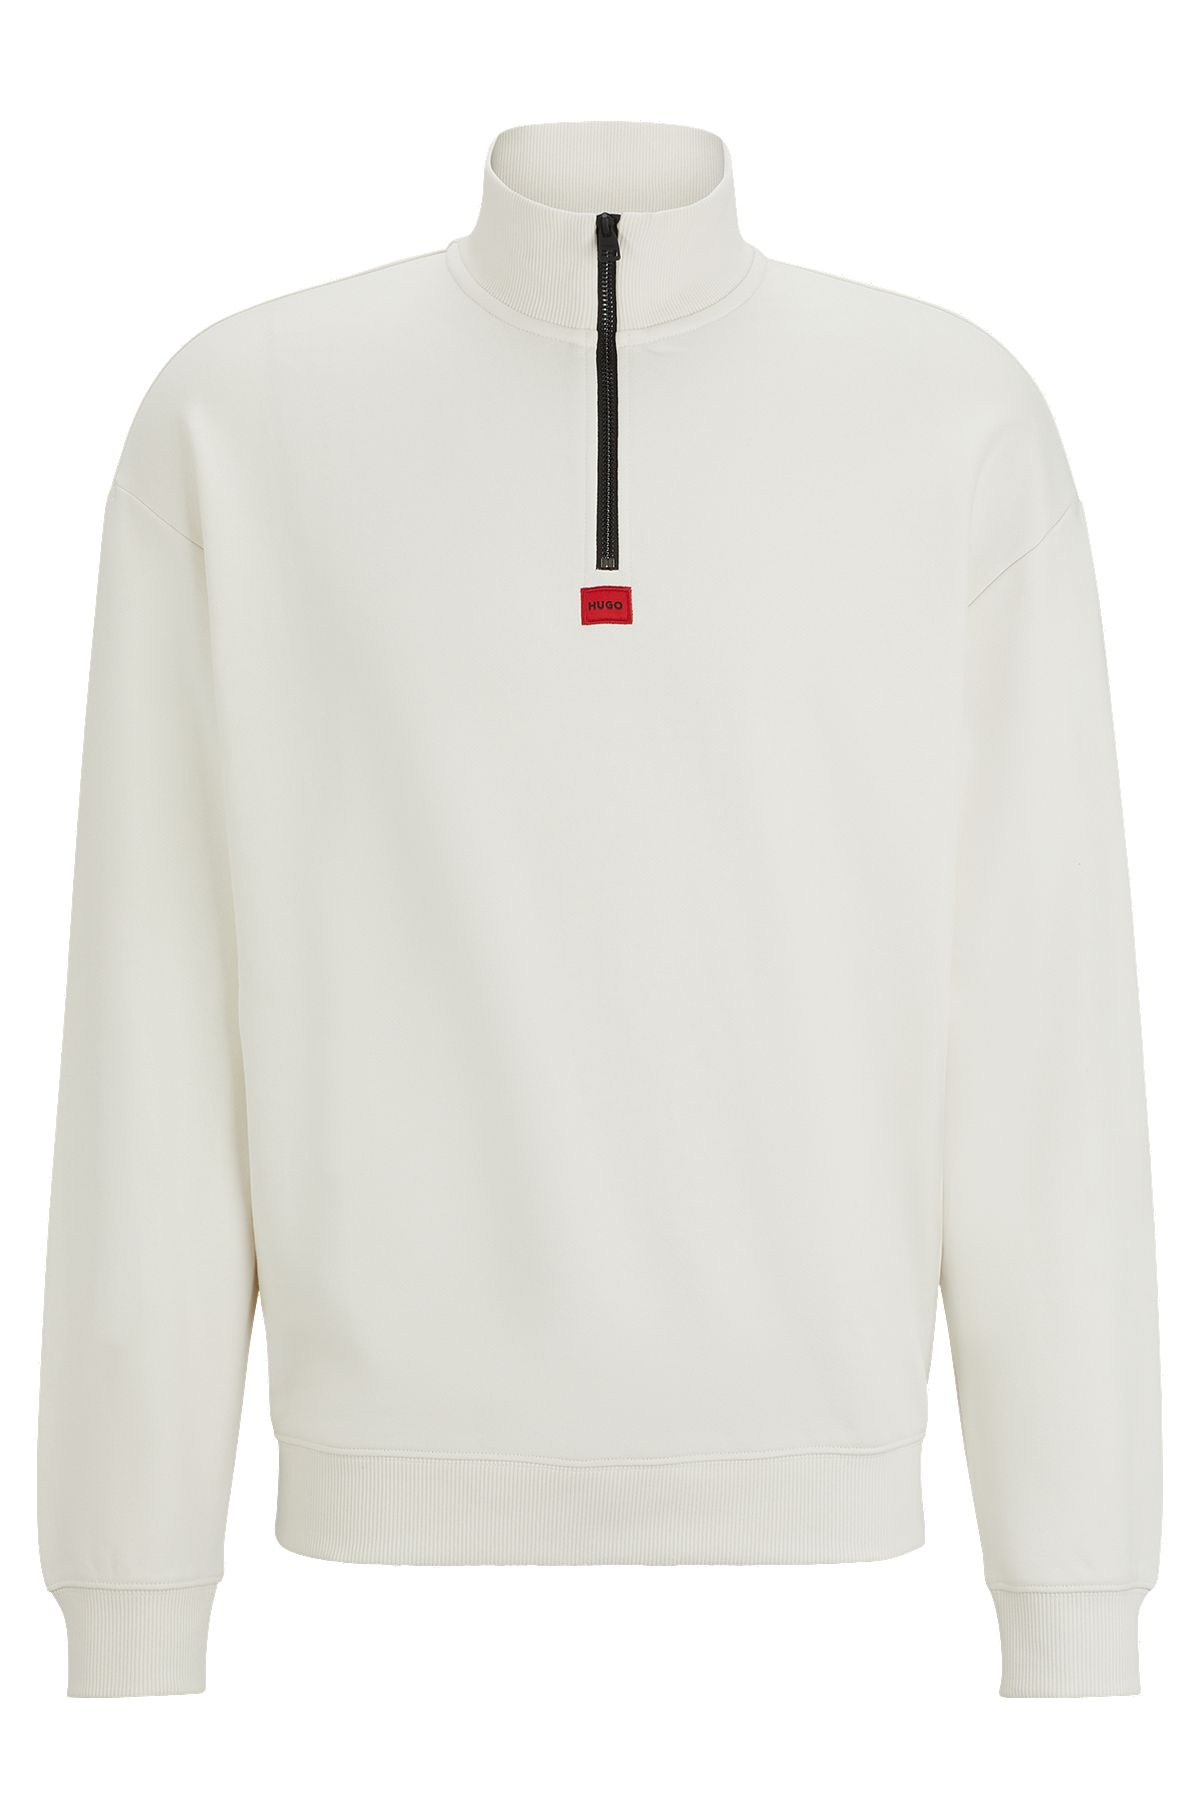 Relaxed-fit zip-neck sweatshirt in French terry cotton, White